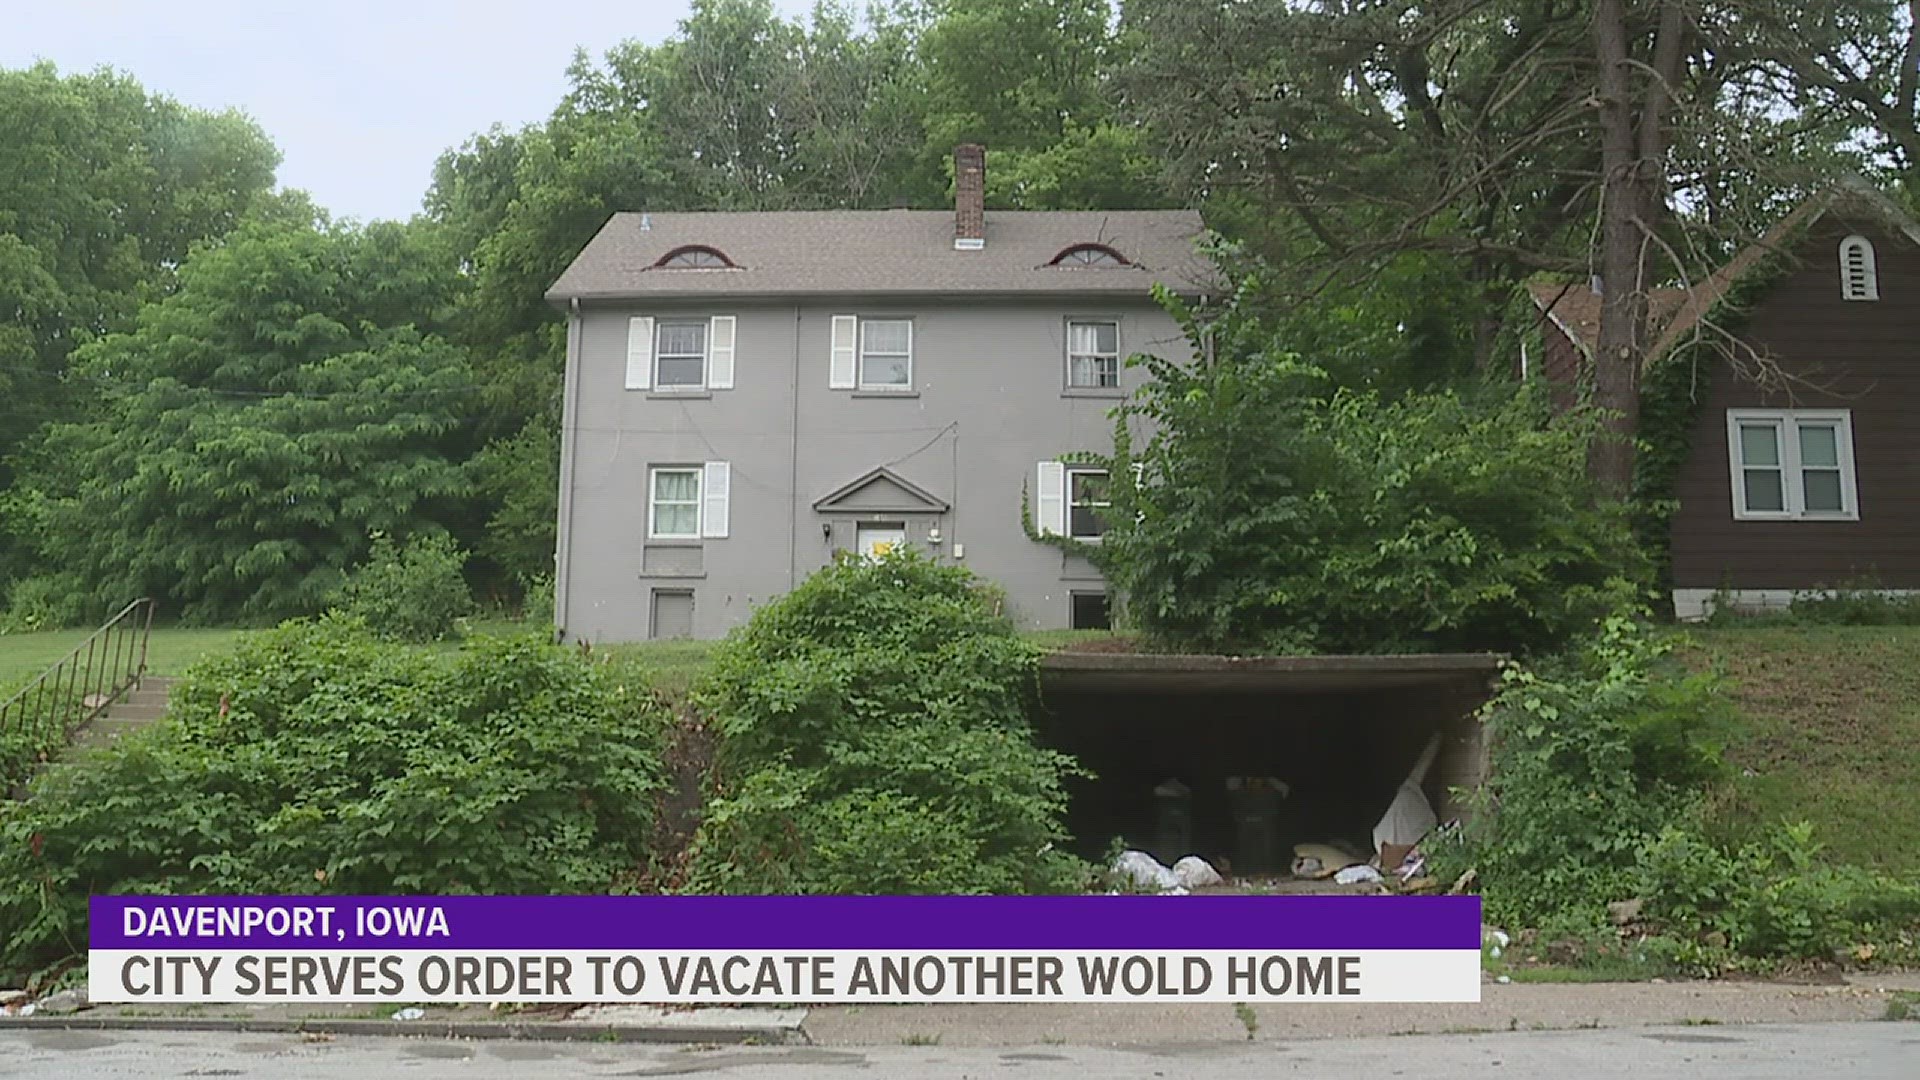 The home, found at 1440 Jersey Ridge Rd., had a list of violations posted on its door June 29.